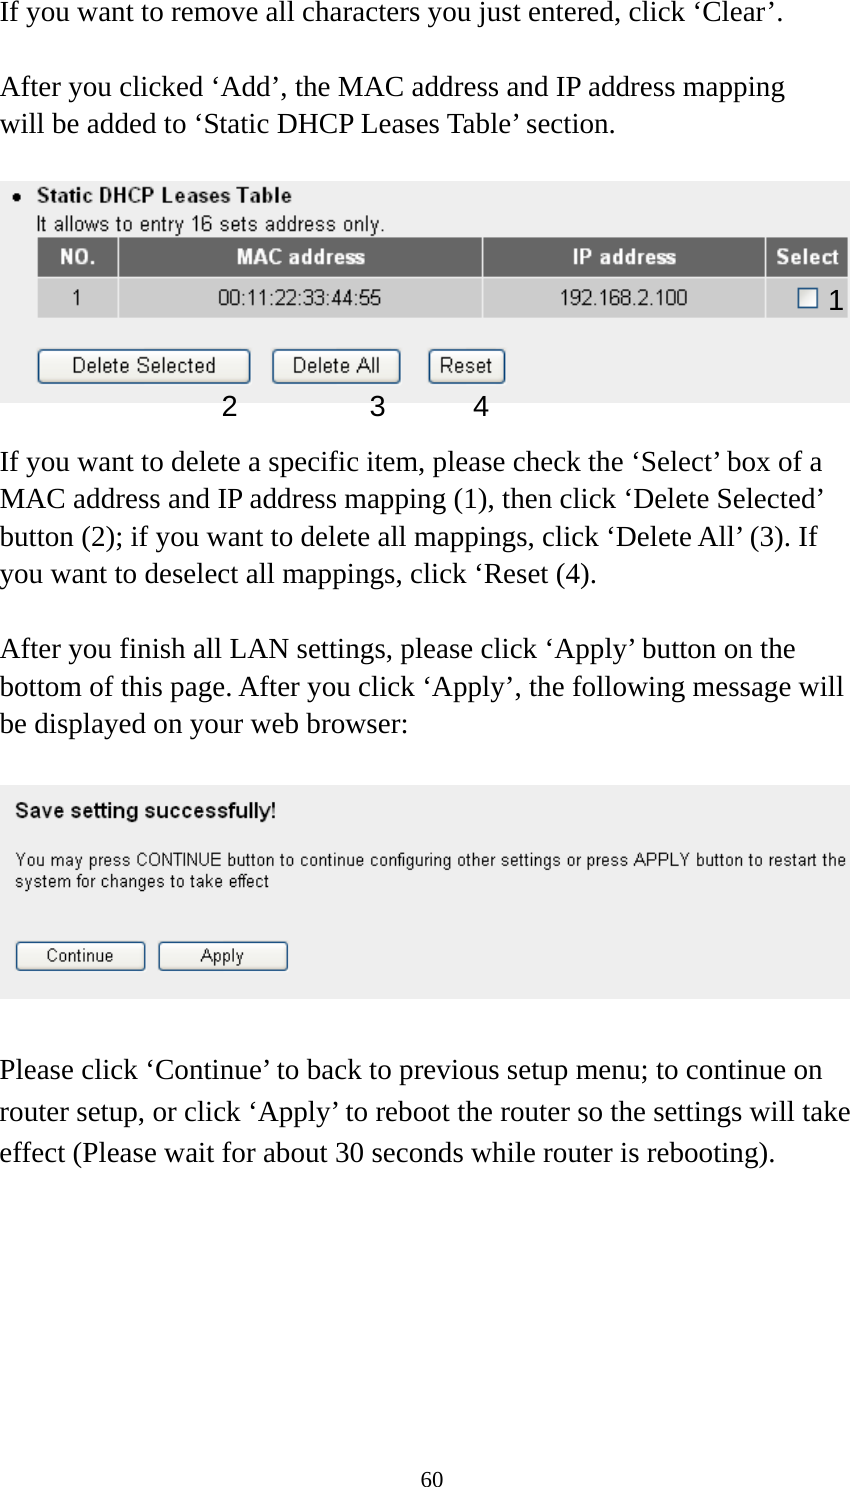 60 If you want to remove all characters you just entered, click ‘Clear’.  After you clicked ‘Add’, the MAC address and IP address mapping will be added to ‘Static DHCP Leases Table’ section.    If you want to delete a specific item, please check the ‘Select’ box of a MAC address and IP address mapping (1), then click ‘Delete Selected’ button (2); if you want to delete all mappings, click ‘Delete All’ (3). If you want to deselect all mappings, click ‘Reset (4).  After you finish all LAN settings, please click ‘Apply’ button on the bottom of this page. After you click ‘Apply’, the following message will be displayed on your web browser:    Please click ‘Continue’ to back to previous setup menu; to continue on router setup, or click ‘Apply’ to reboot the router so the settings will take effect (Please wait for about 30 seconds while router is rebooting). 1 2 3 4 